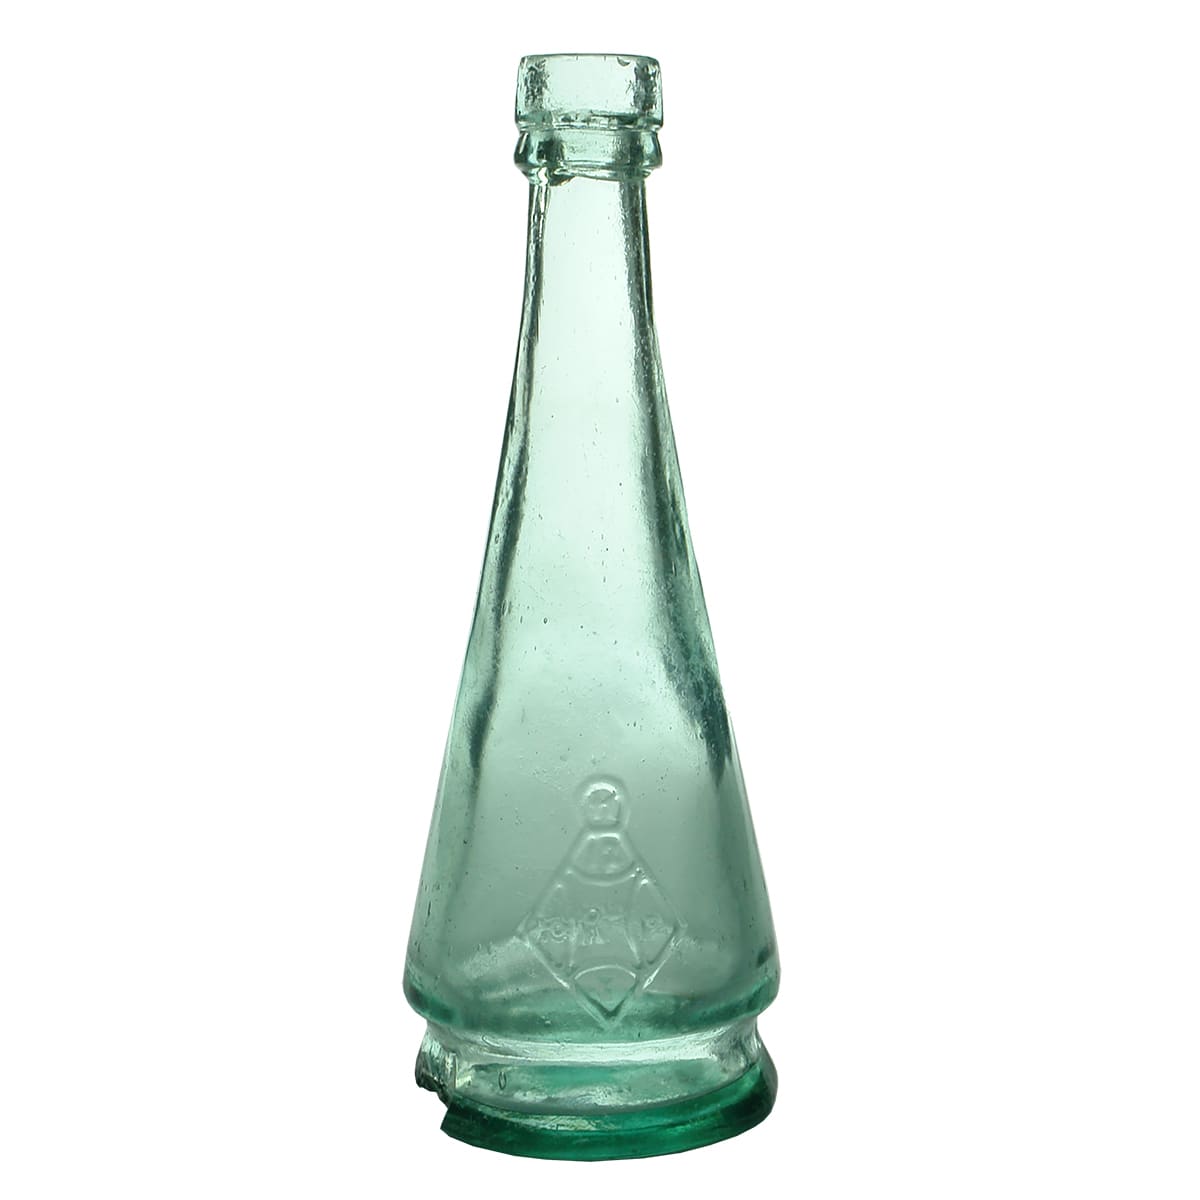 Goldfields Salad Oil. Conical with stepped base. Registration Diamond to front.